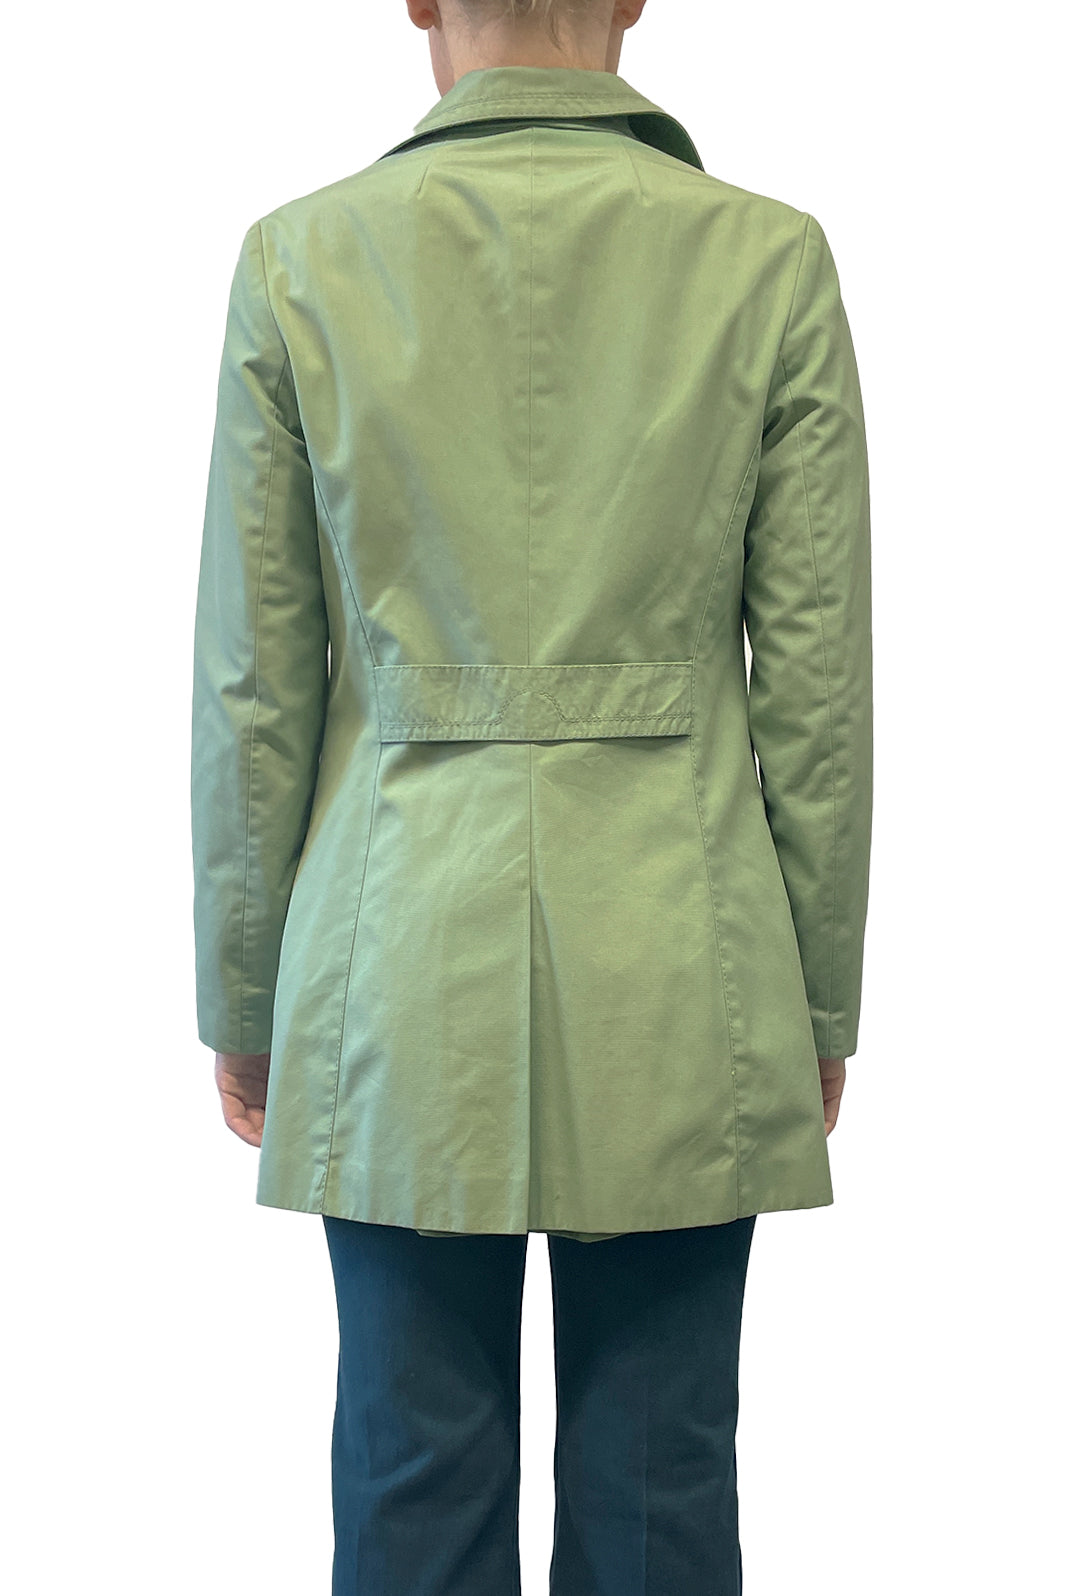 Vintage Sixties C&A Green Button Up Trench Coat